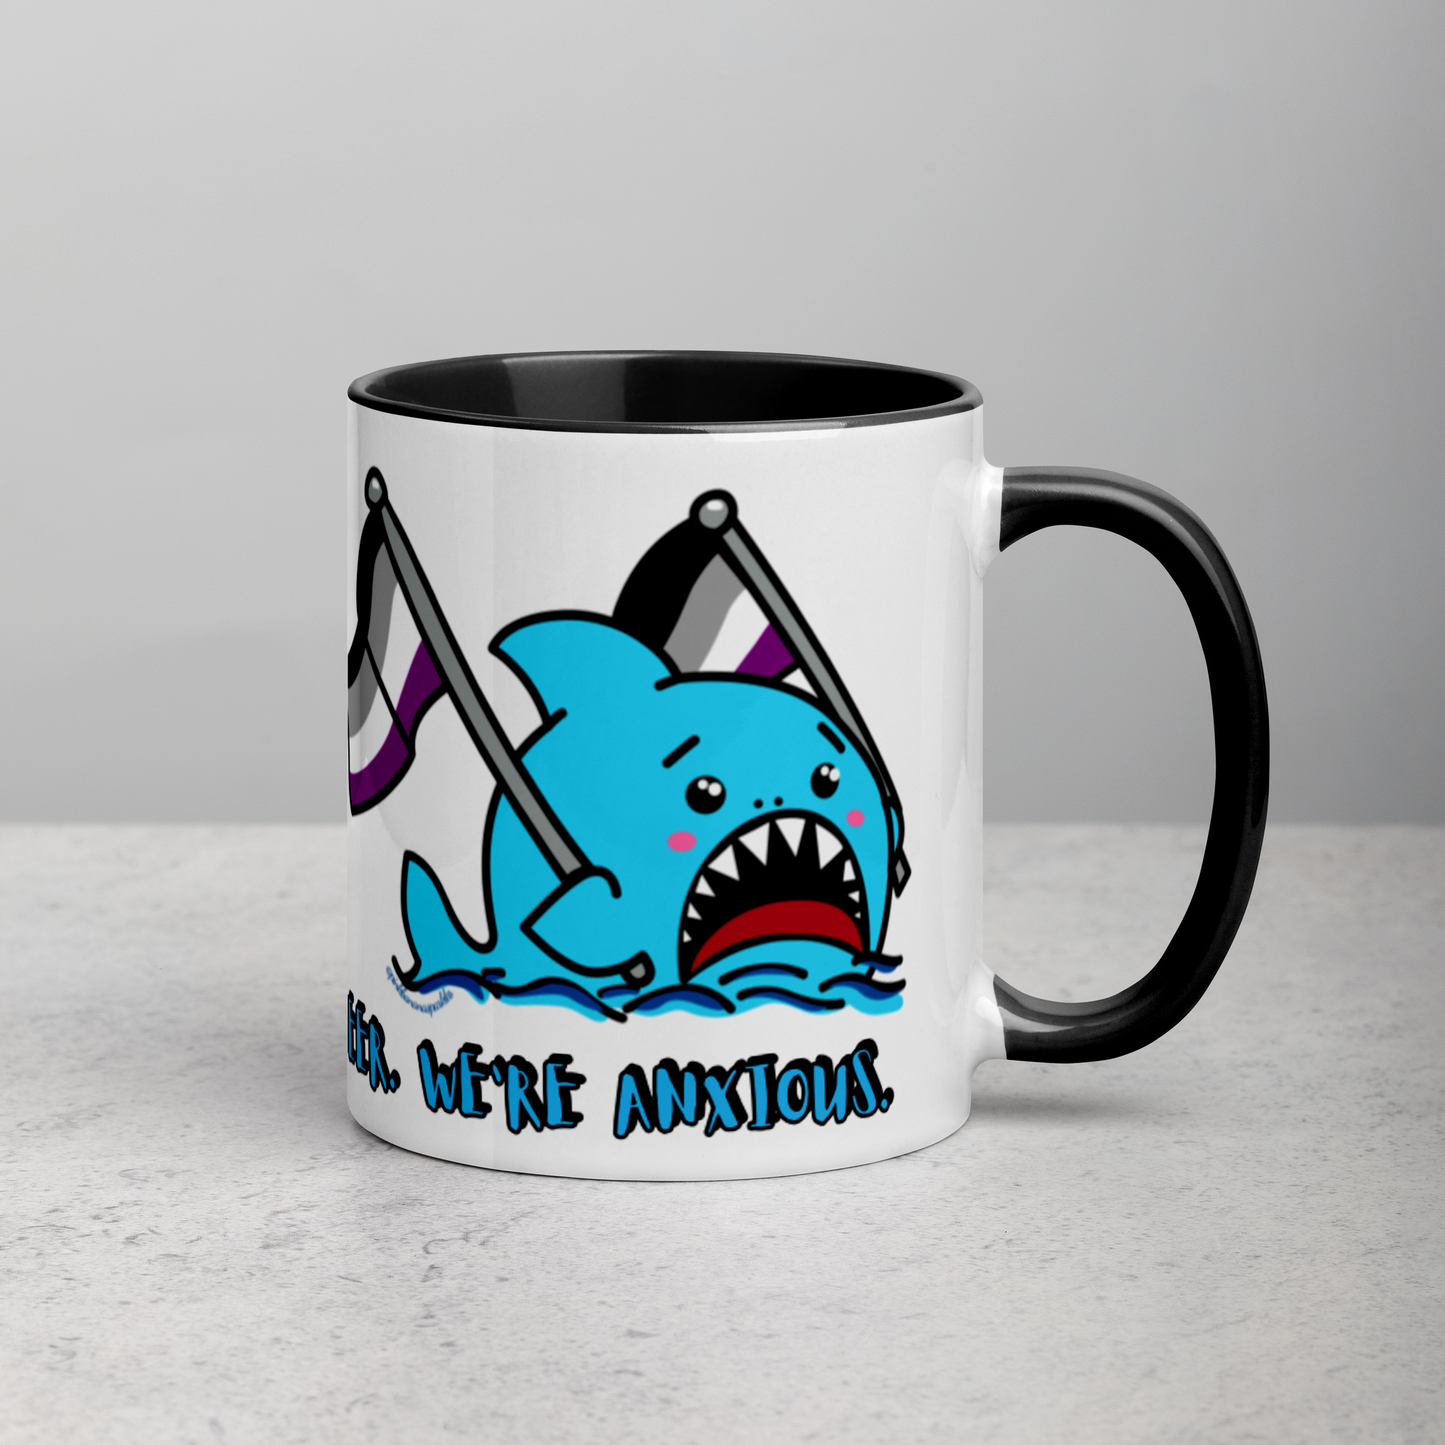 "We're Here..." Anxious Shark Mug with Asexual (Ace) Pride Flag (11oz)